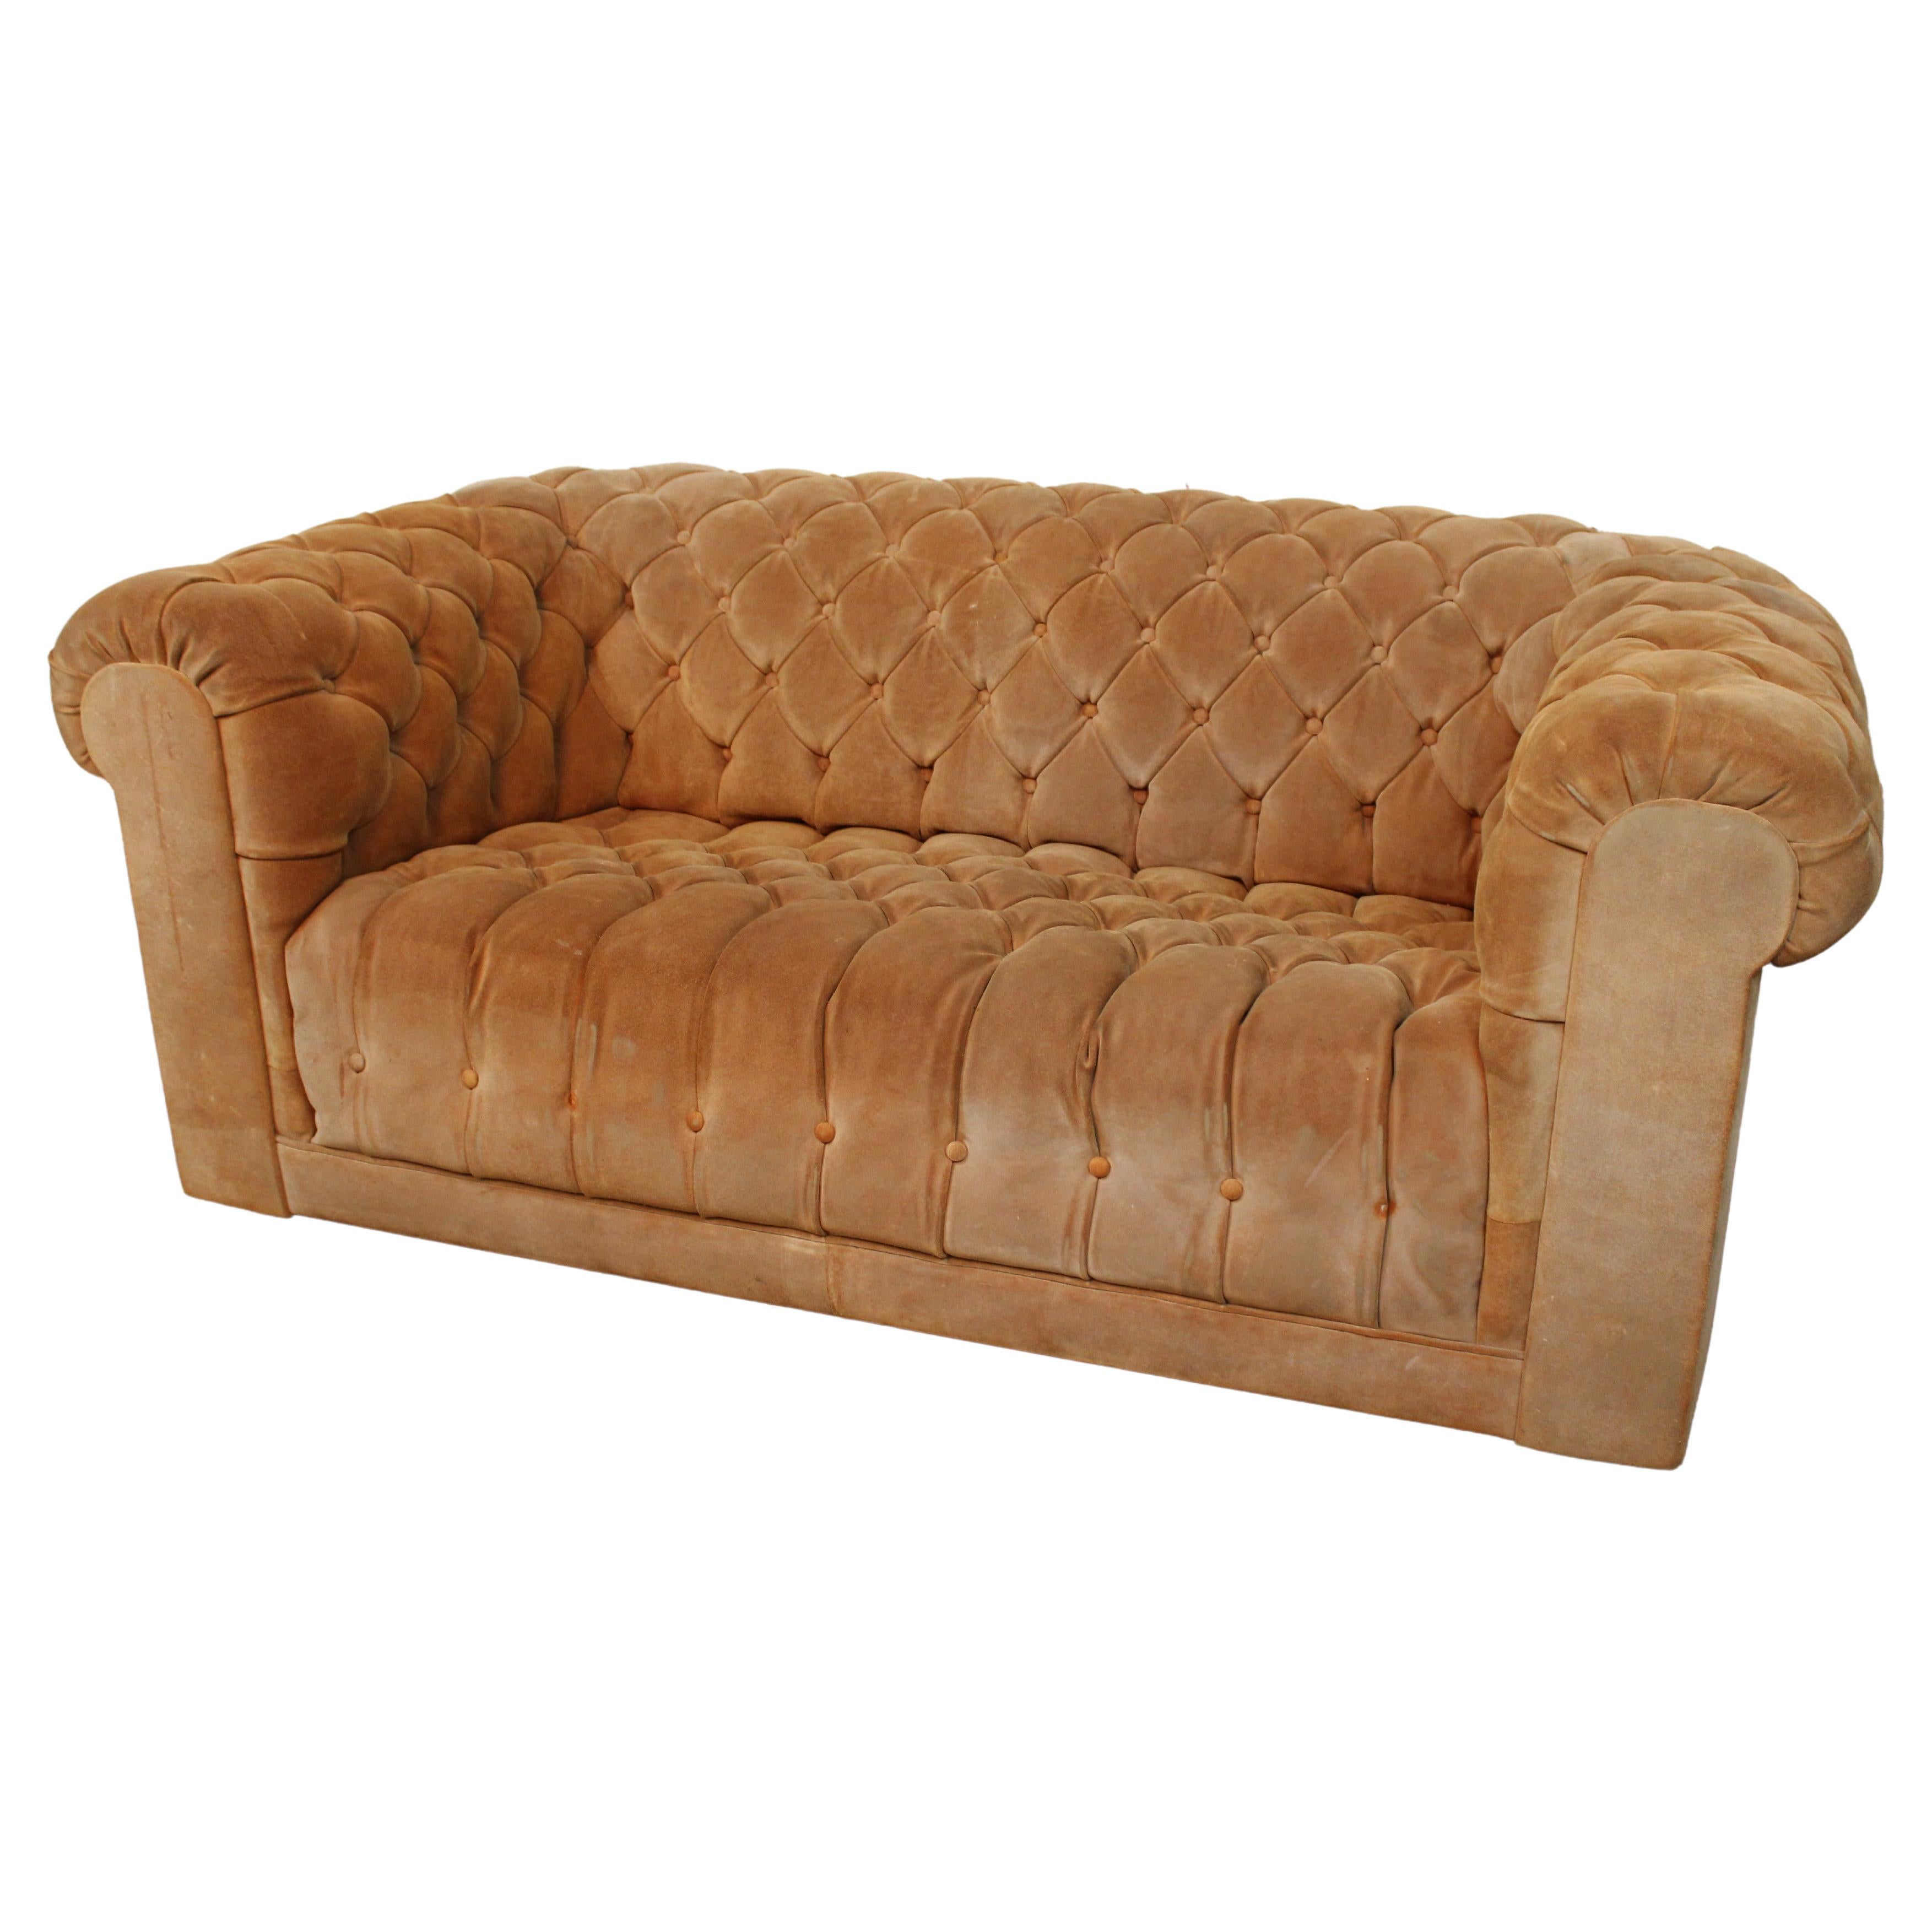 Mid-Century Vintage Caramel Suede Chesterfield Sofa For Sale